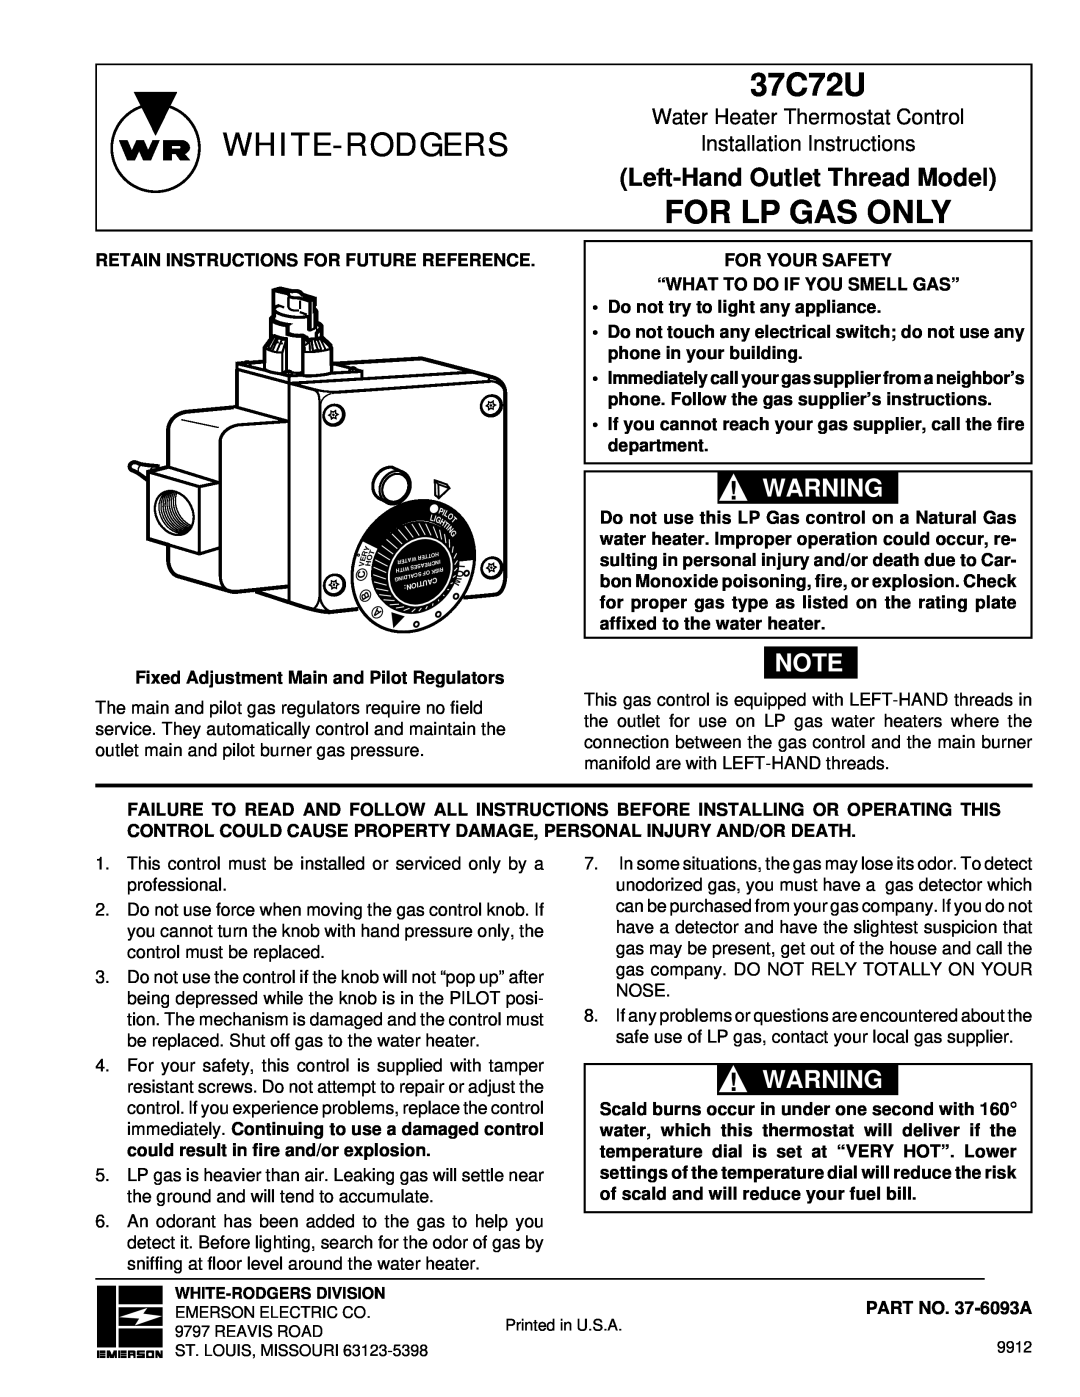 White Rodgers 37C72U installation instructions Left-HandOutlet Thread Model, White-Rodgers, For Lp Gas Only 